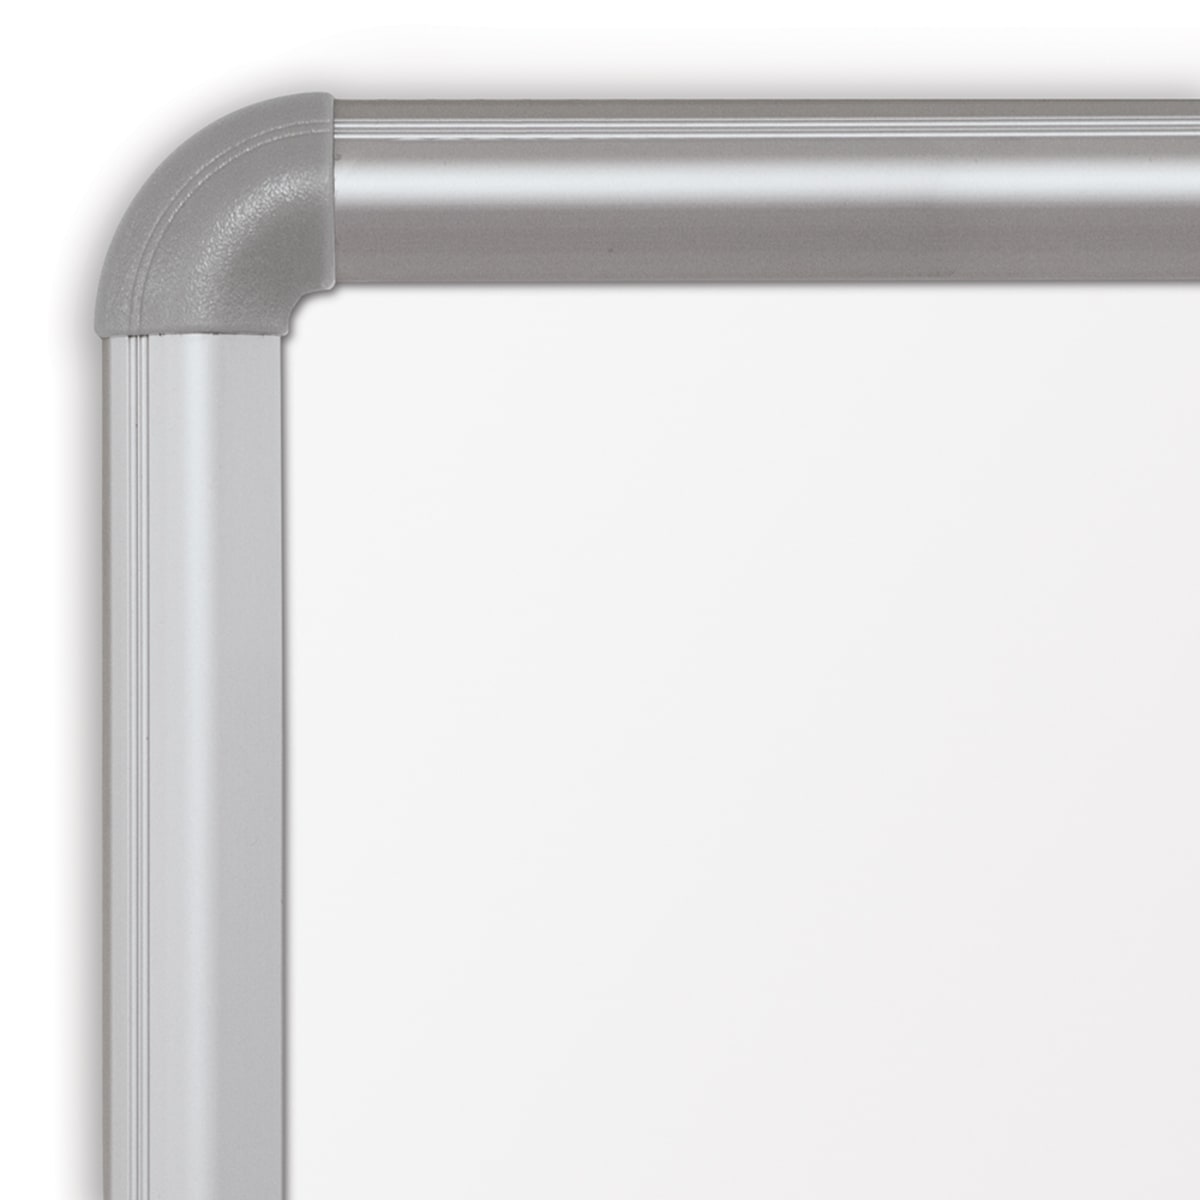 Mooreco Dura-Rite Whiteboard + Presidential Silver Trim - 4'H x 4'W (MOR-212PD) - SchoolOutlet